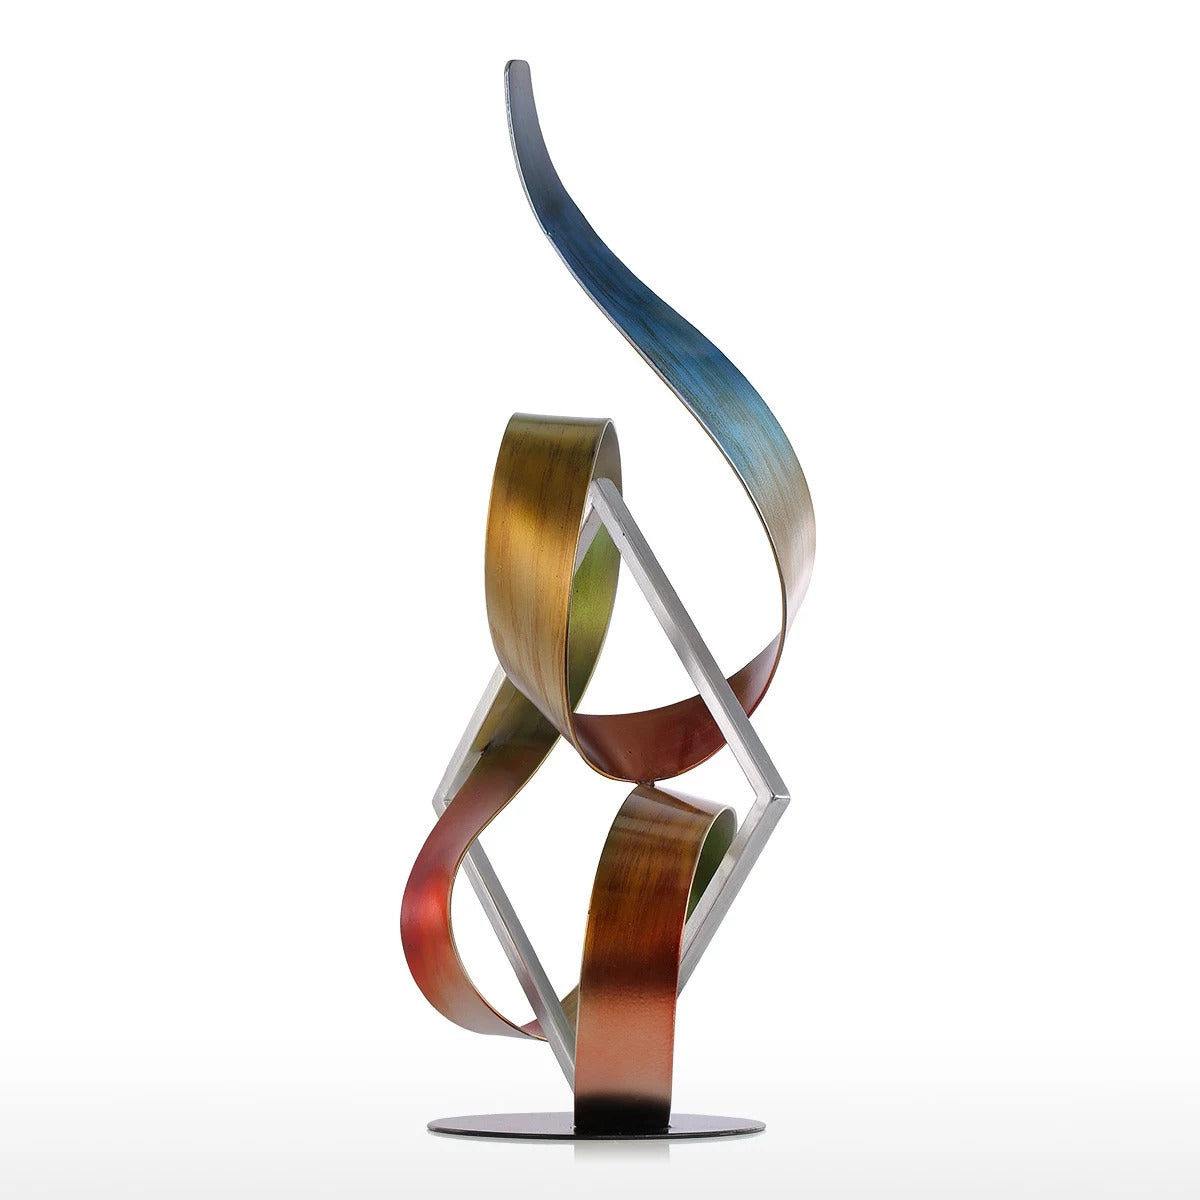 These metal sculptures are a new reflection of space and thought